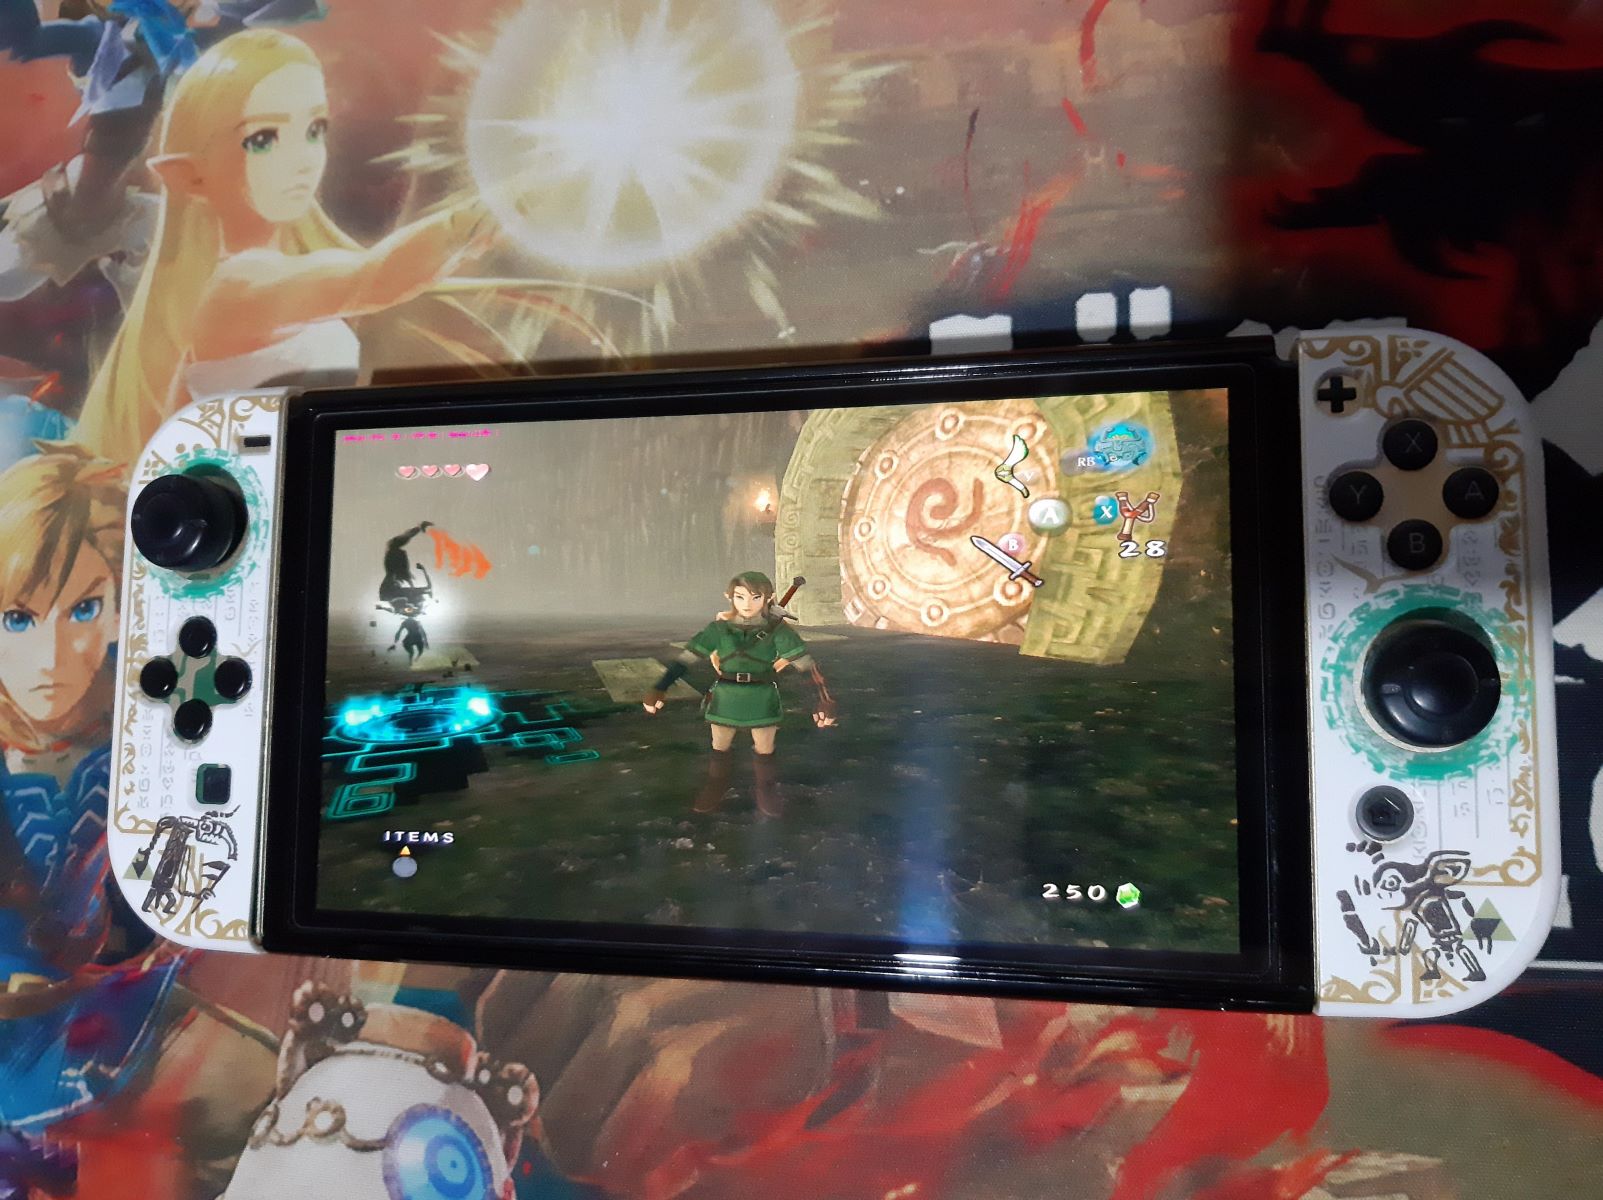 twilight-princess-hd-on-gamepad-gaming-experience-guide